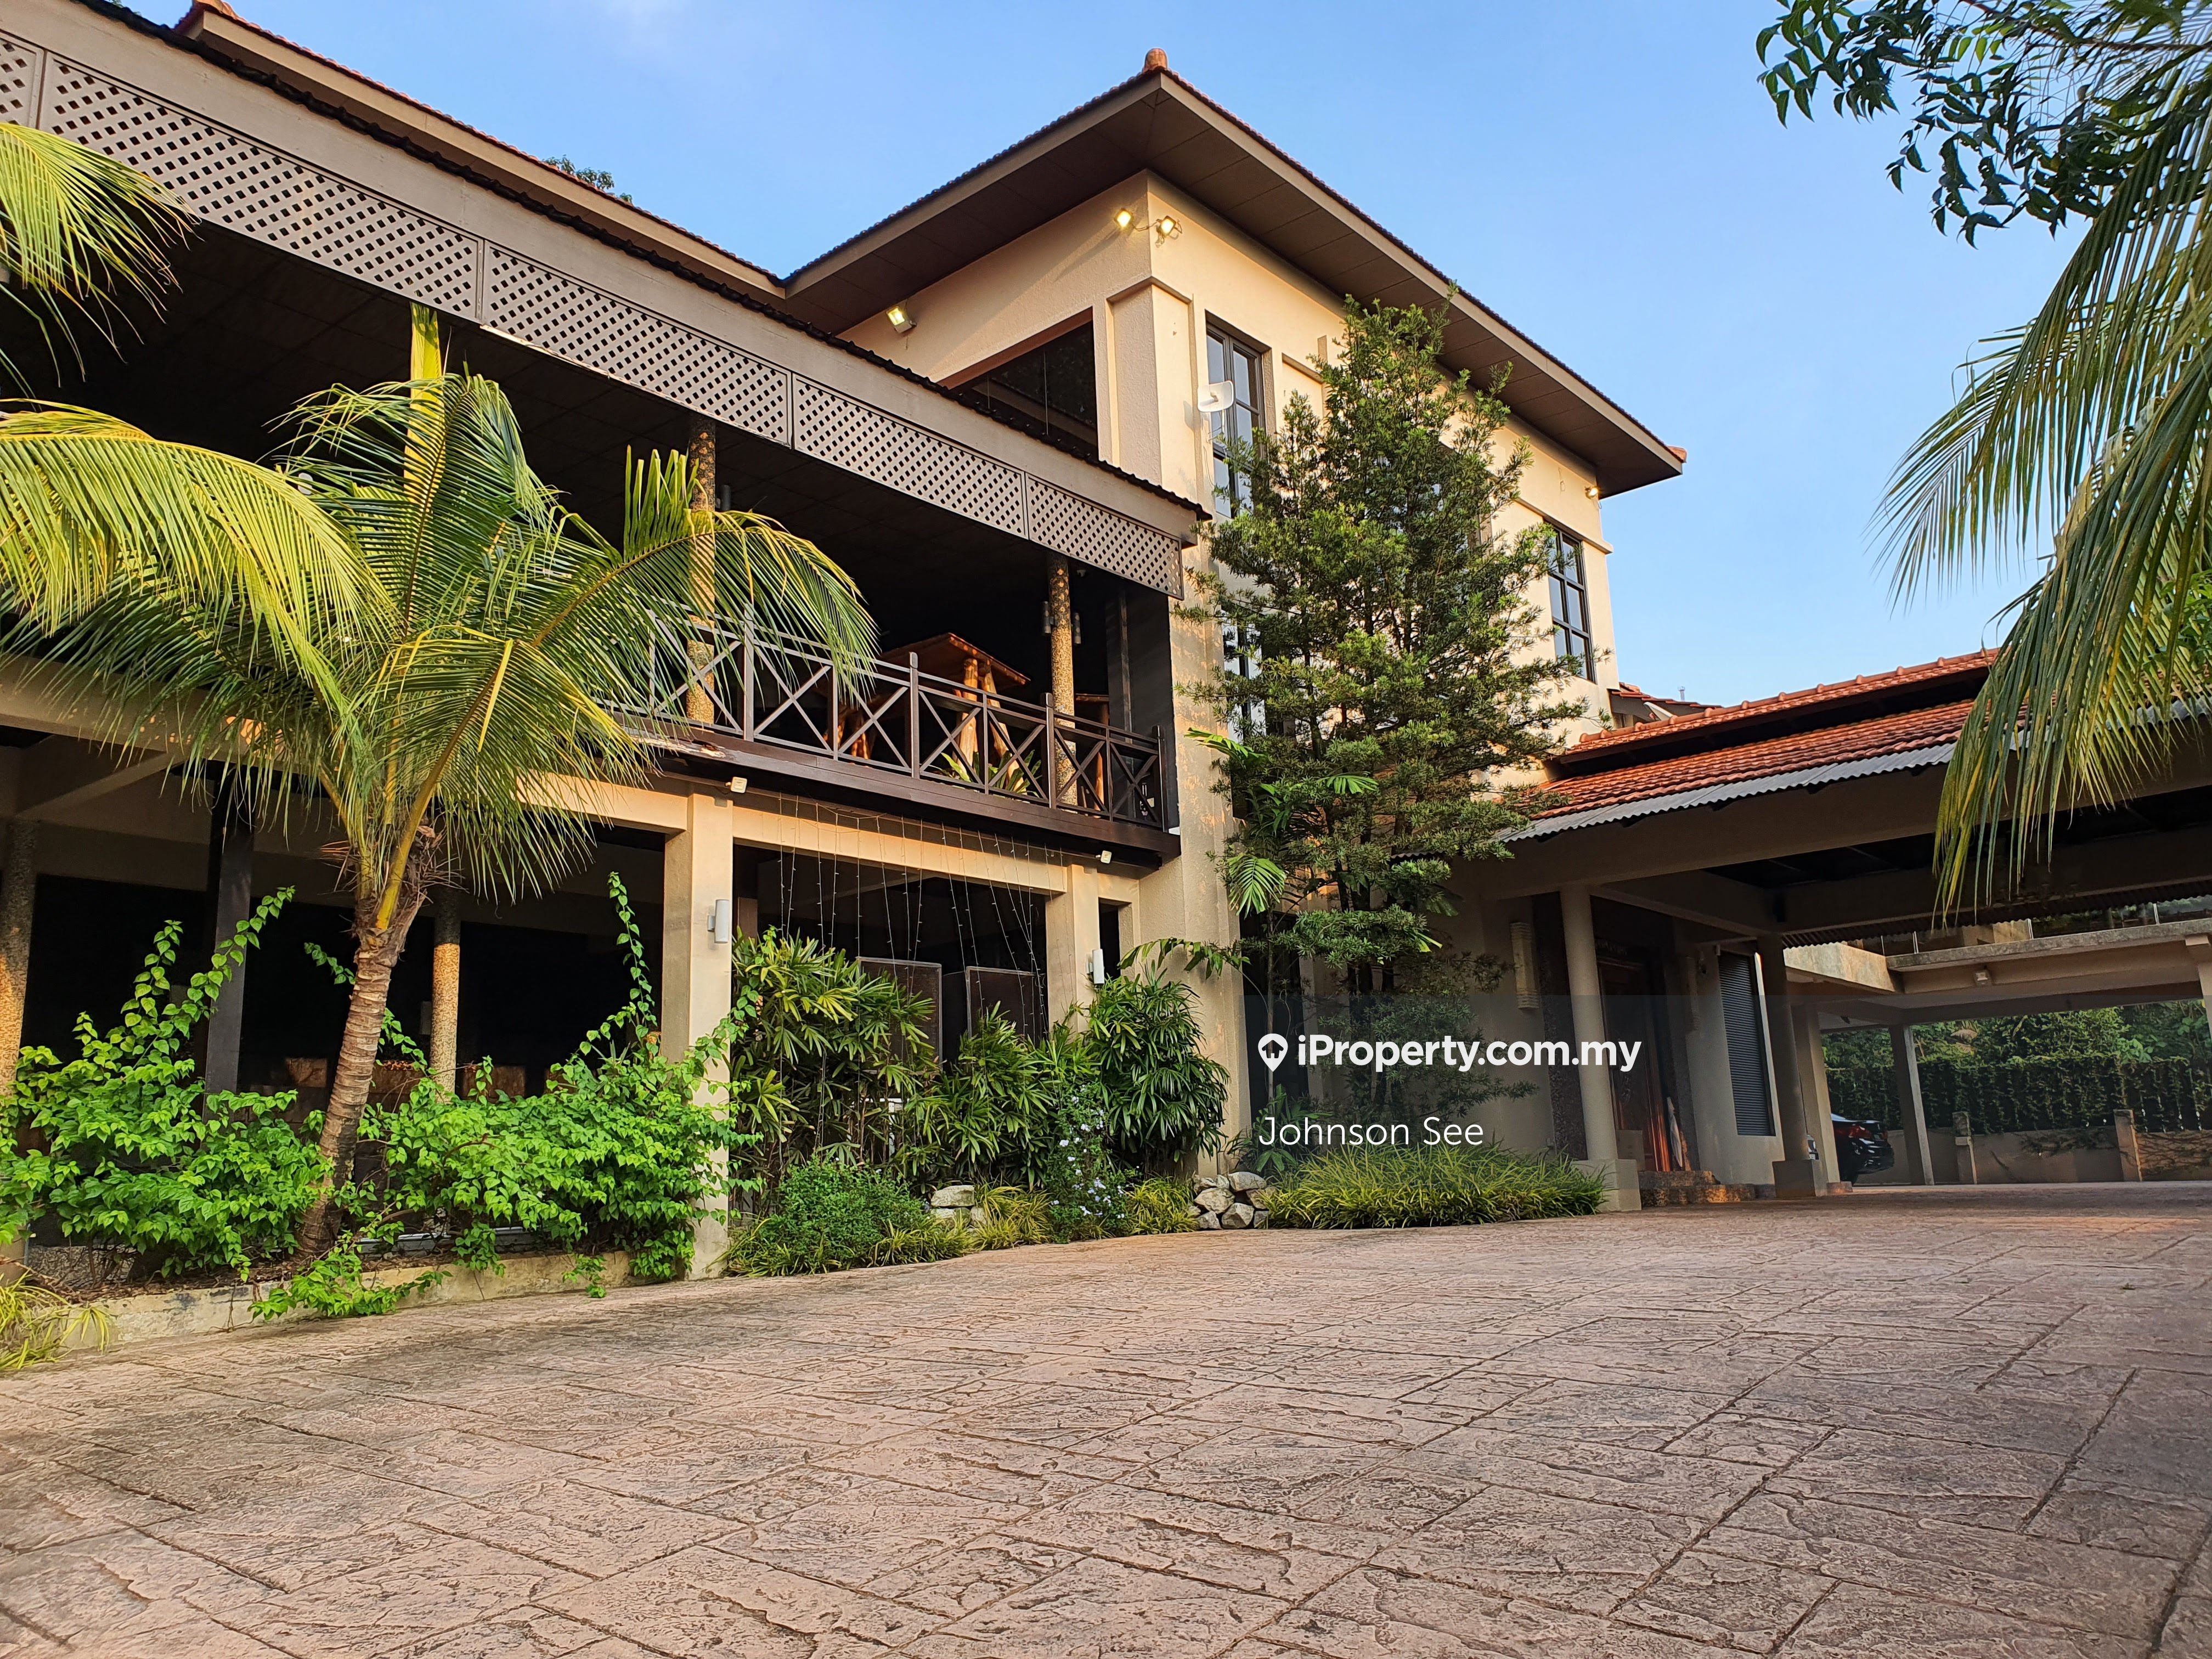 Bungalow Nestled In The Heart Of A Lush Forest Reserve For Sale!